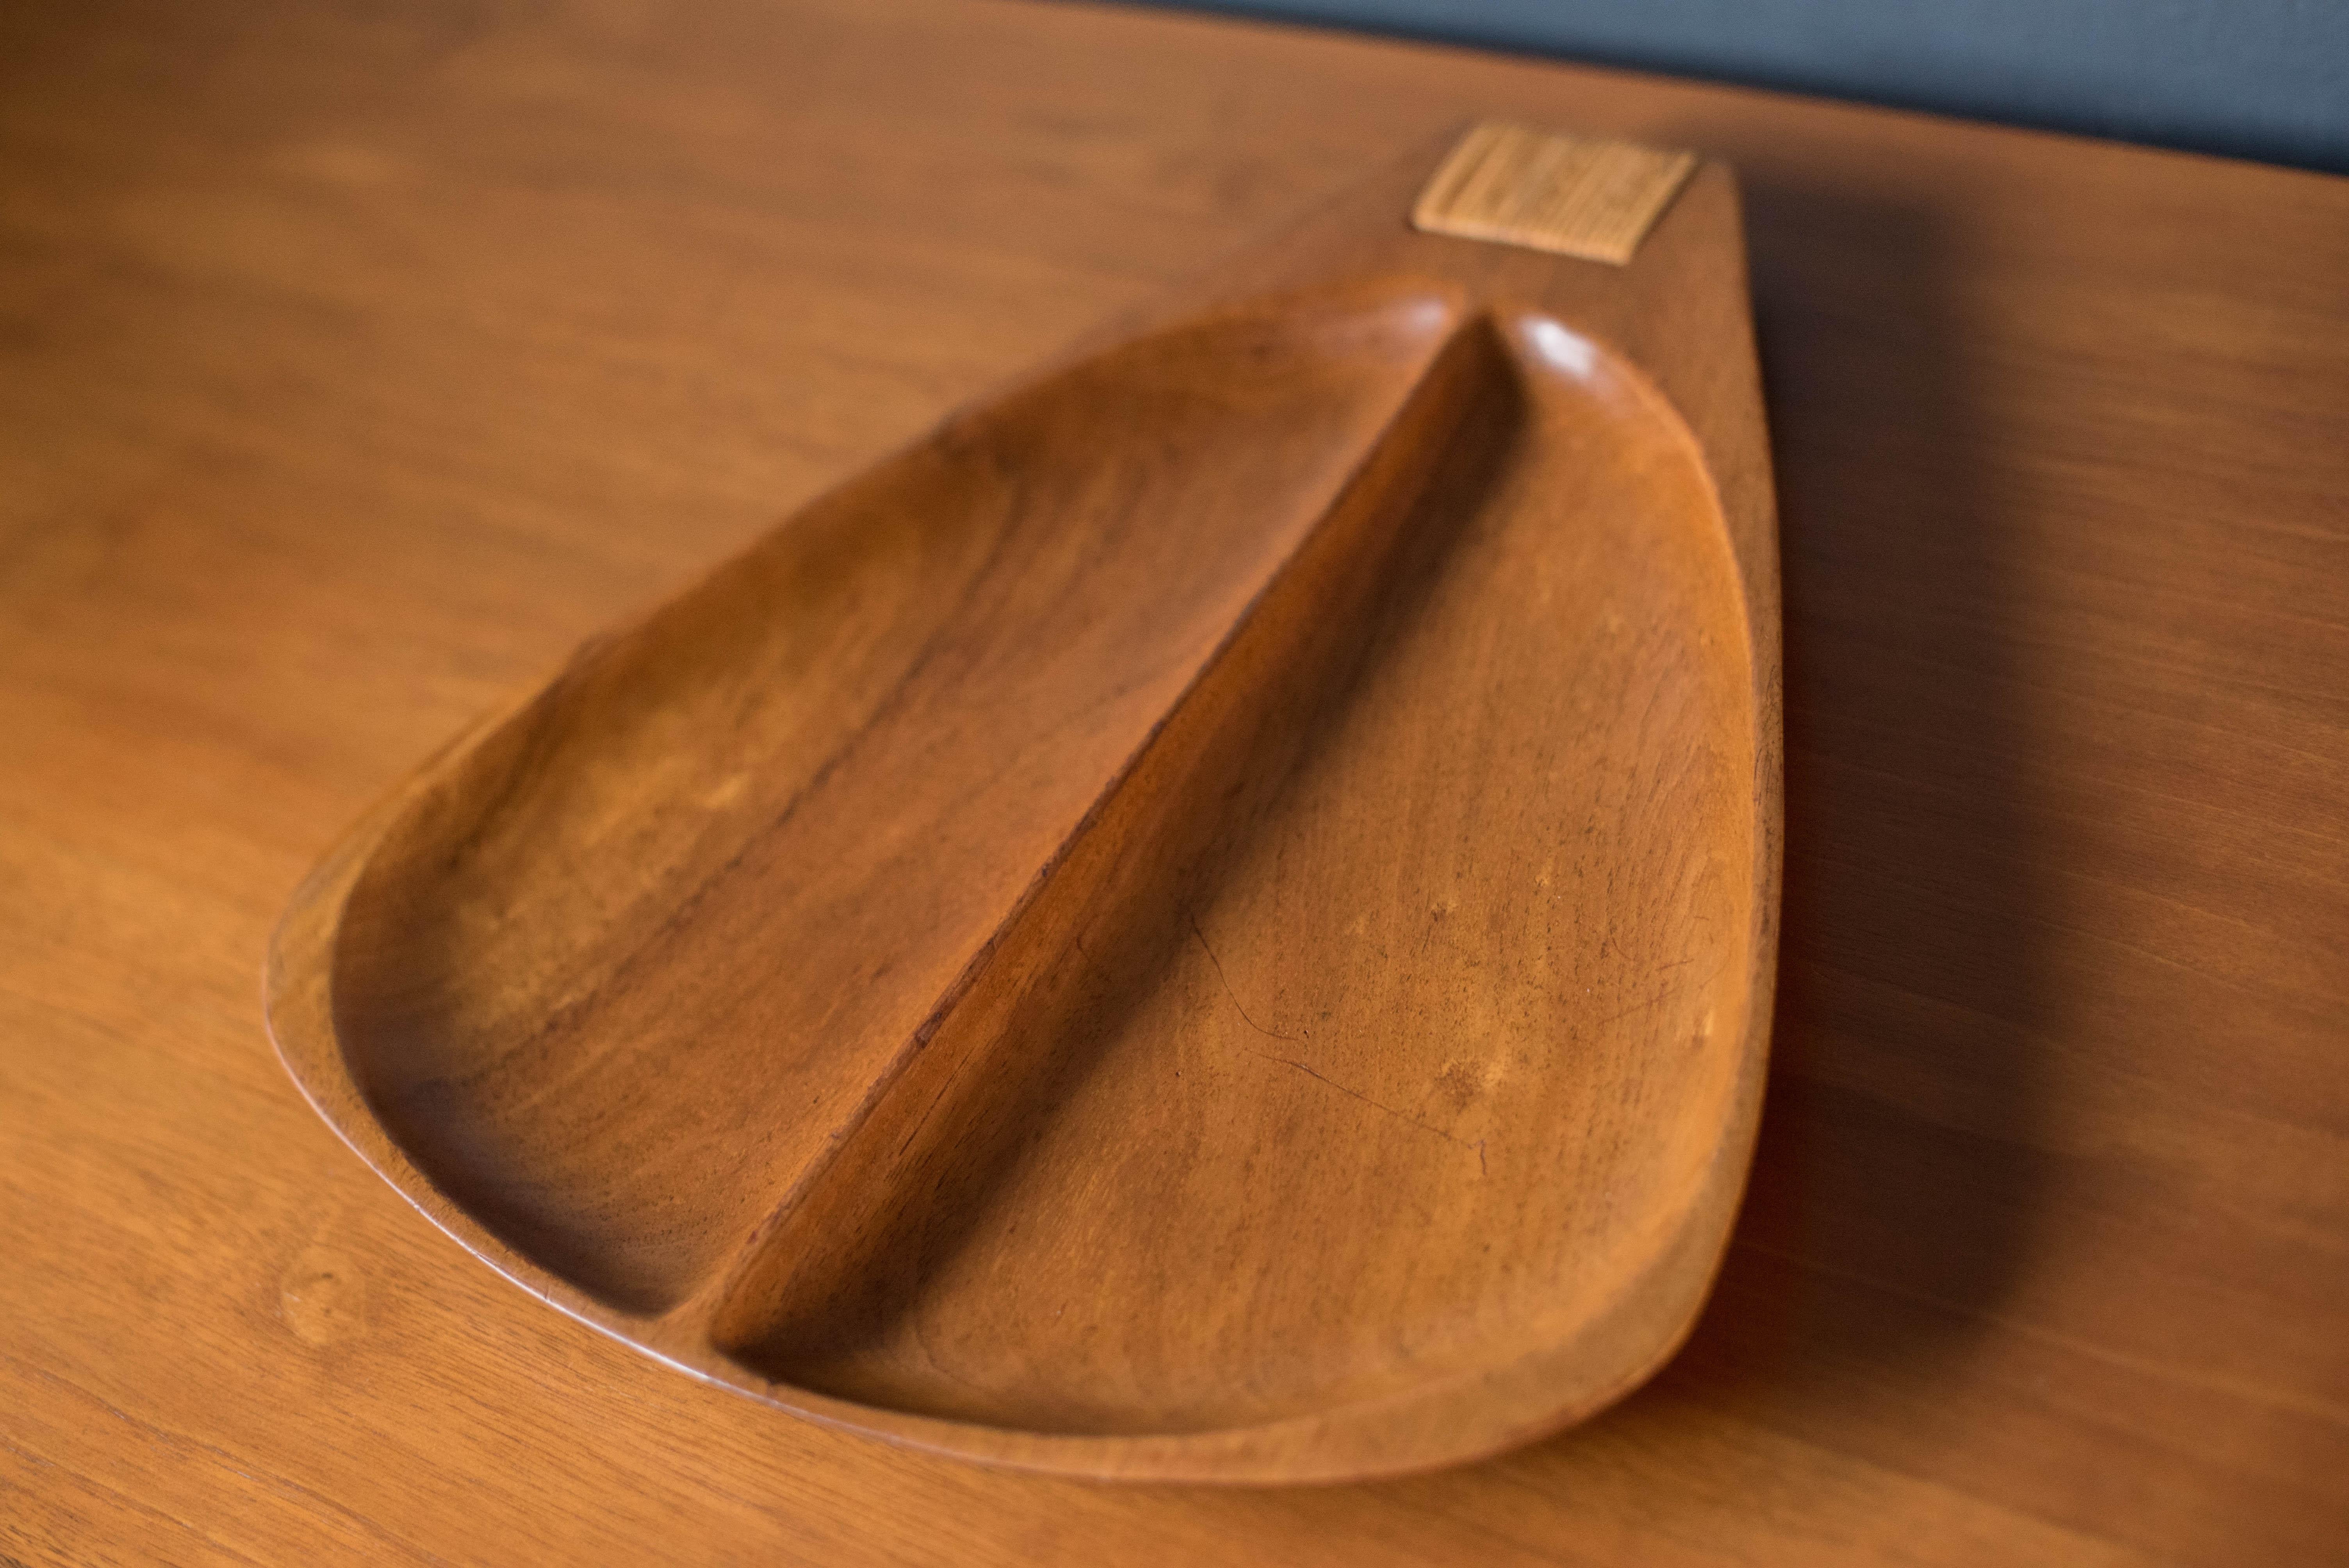 Mid-Century Modern Taverneau Serving Tray by Arthur Umanoff for Raymor In Good Condition For Sale In San Jose, CA